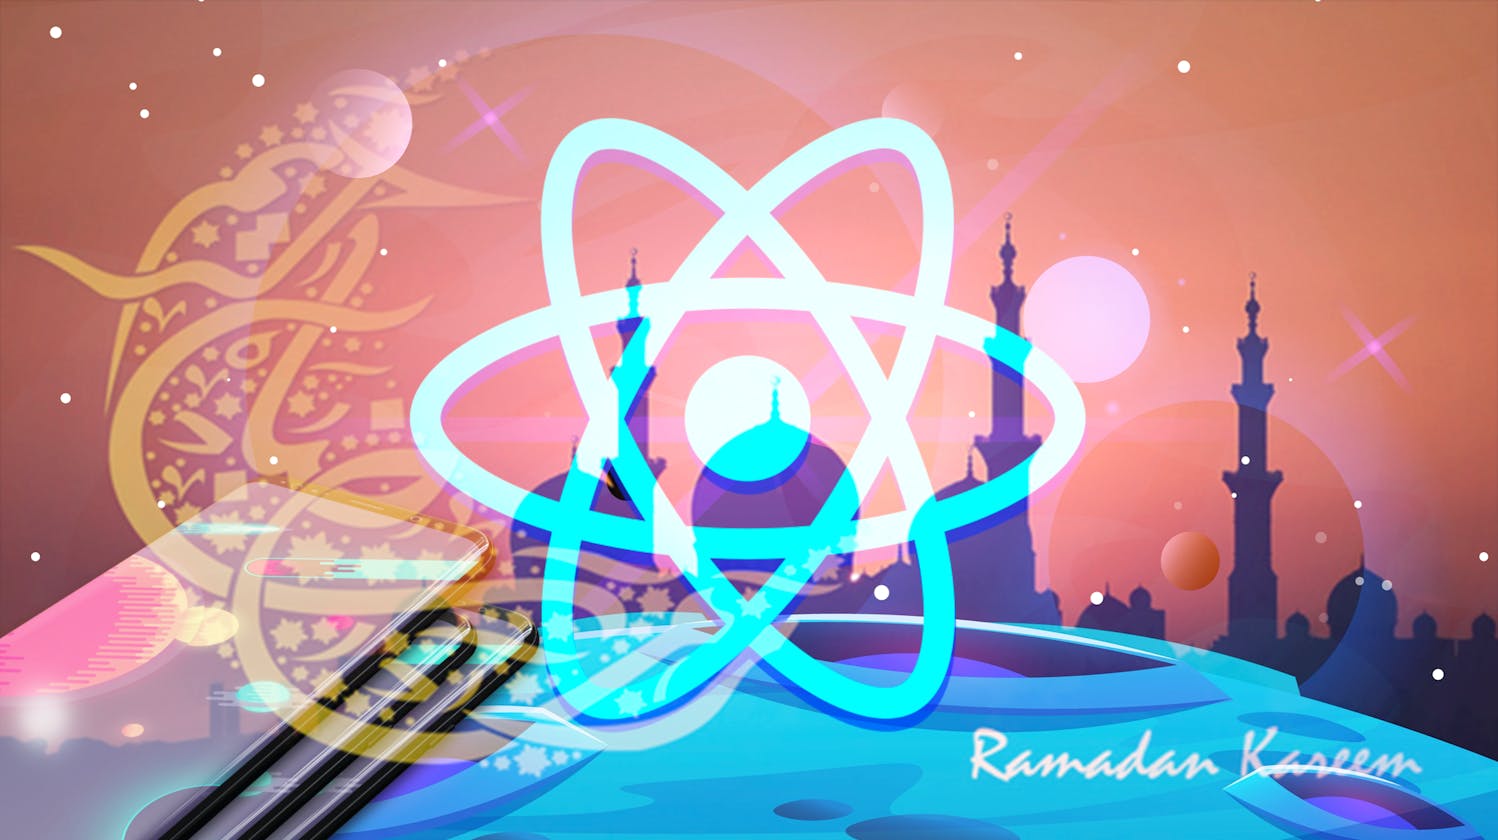 Ceate Milestone try to Complete React Native completely and start with start of Holy Ramadan.